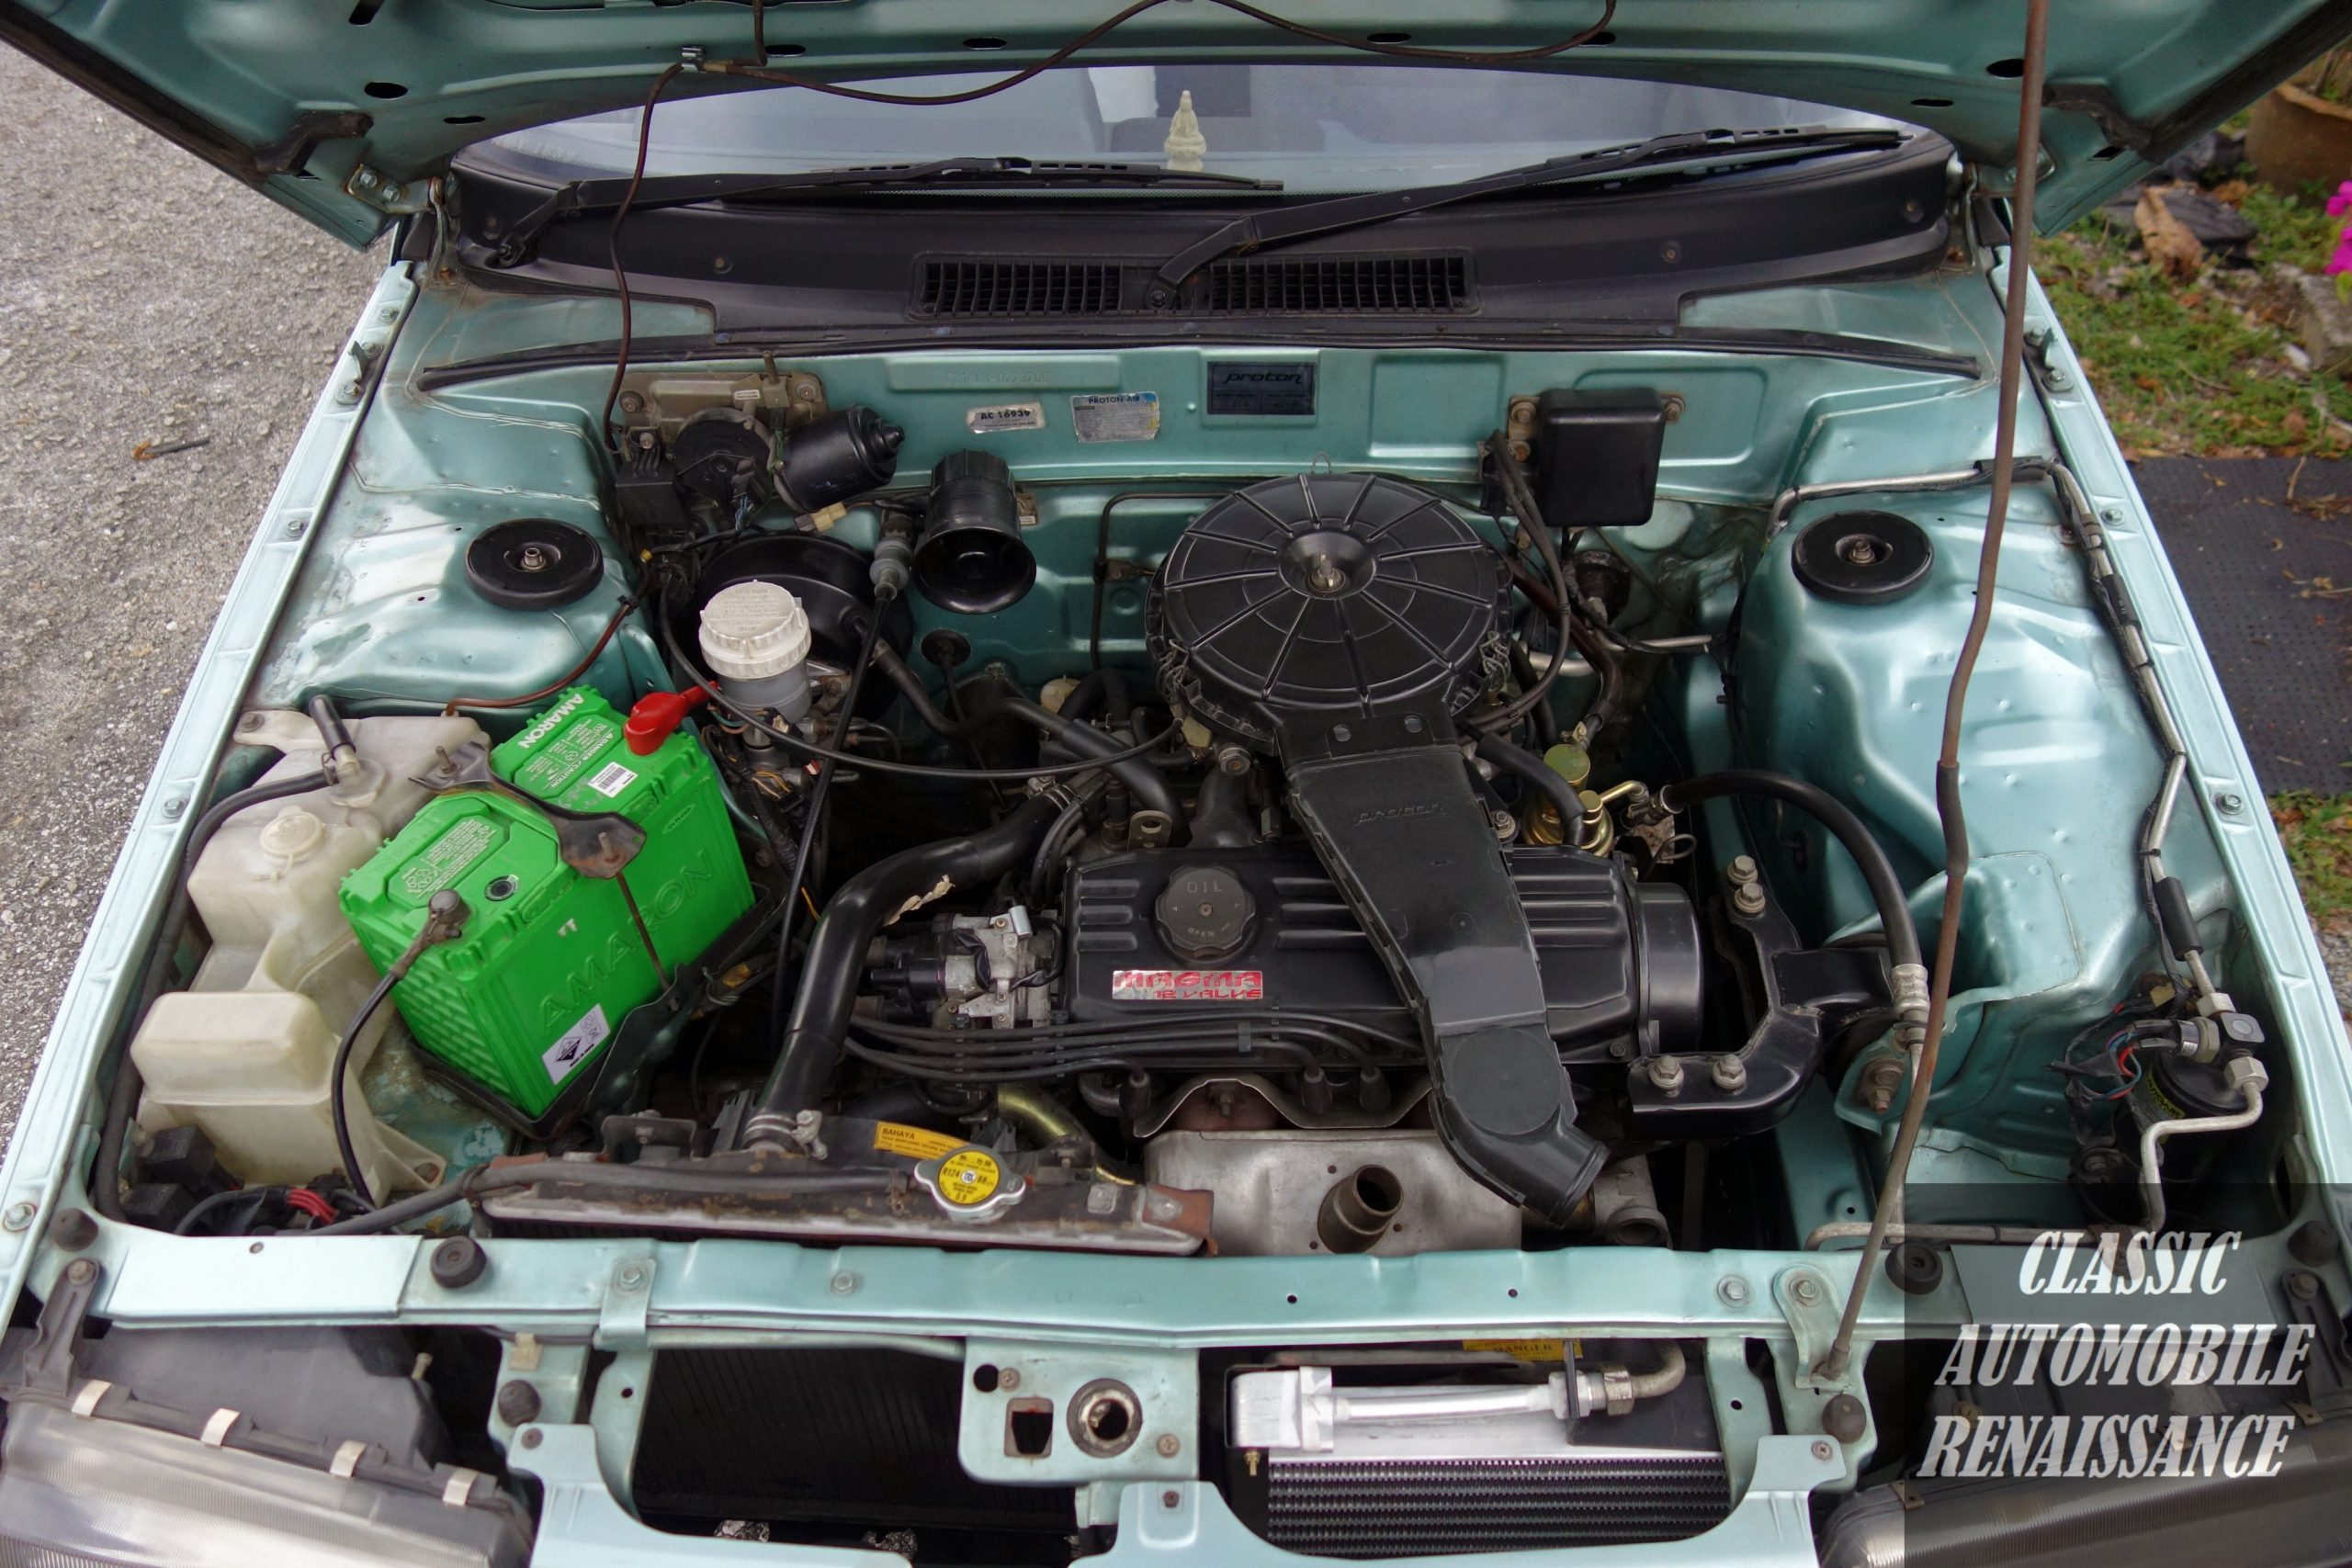 An engine top overhaul on the car had cost RM900. Image credit: Classic Automobile Renaissance